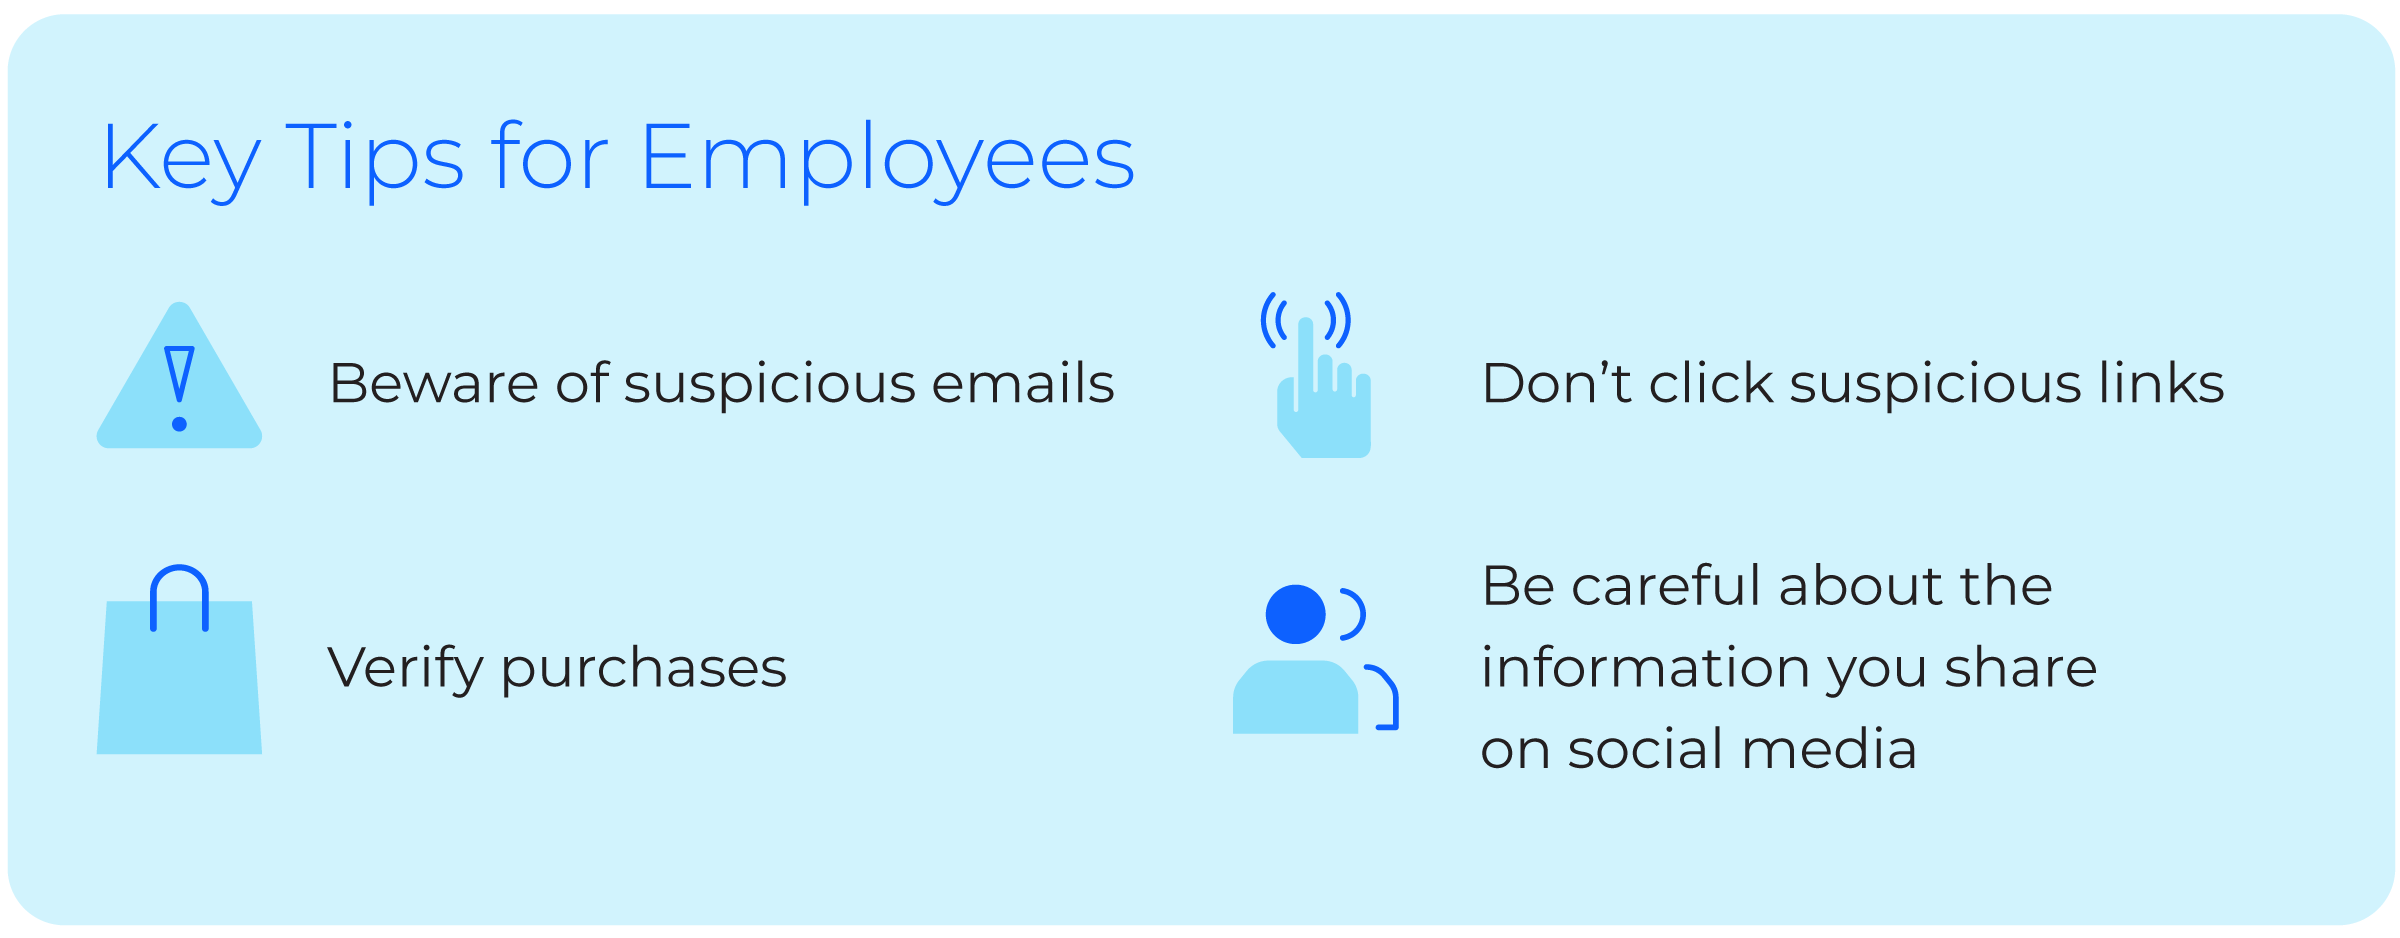 Graphic - Tips for Employees